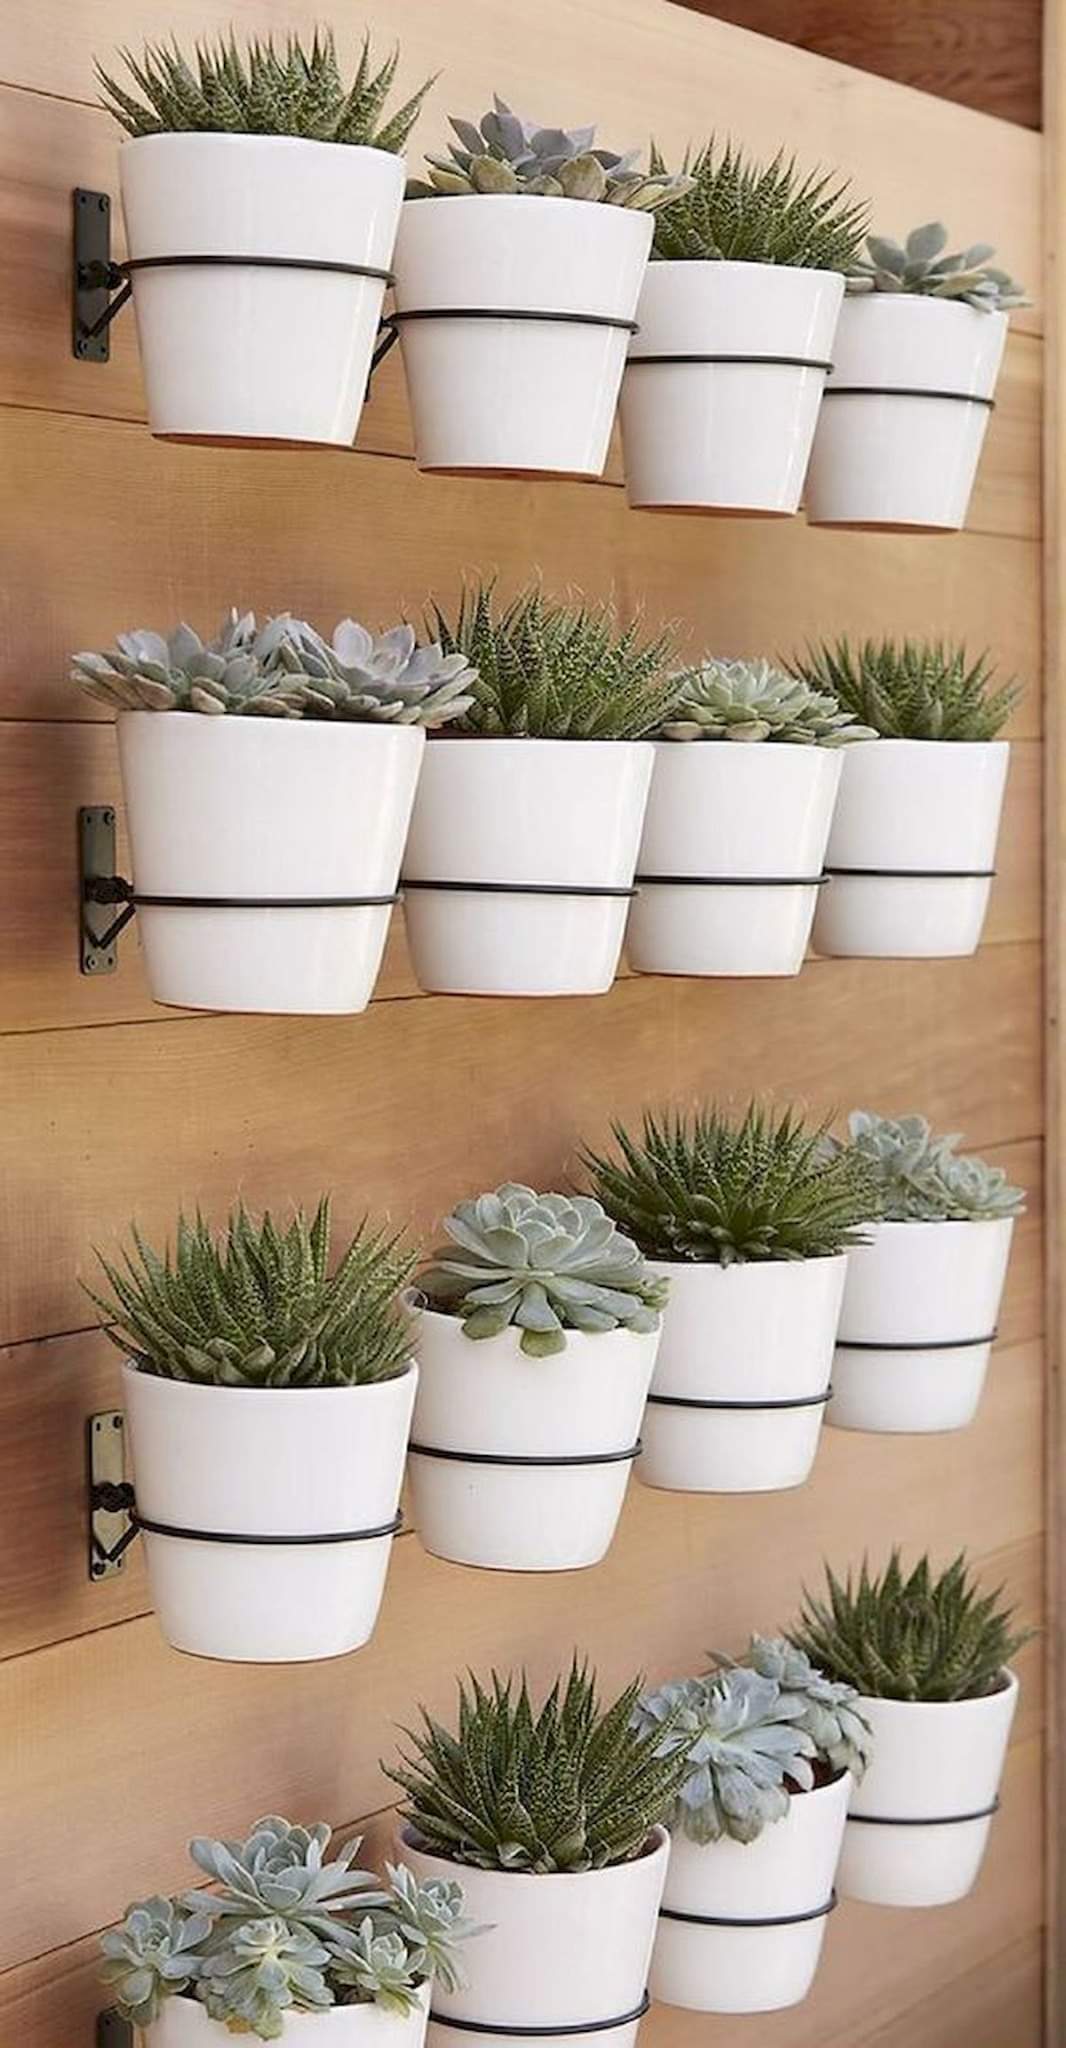 Ideas to Add Plants Inside Your Home (12 Pics)